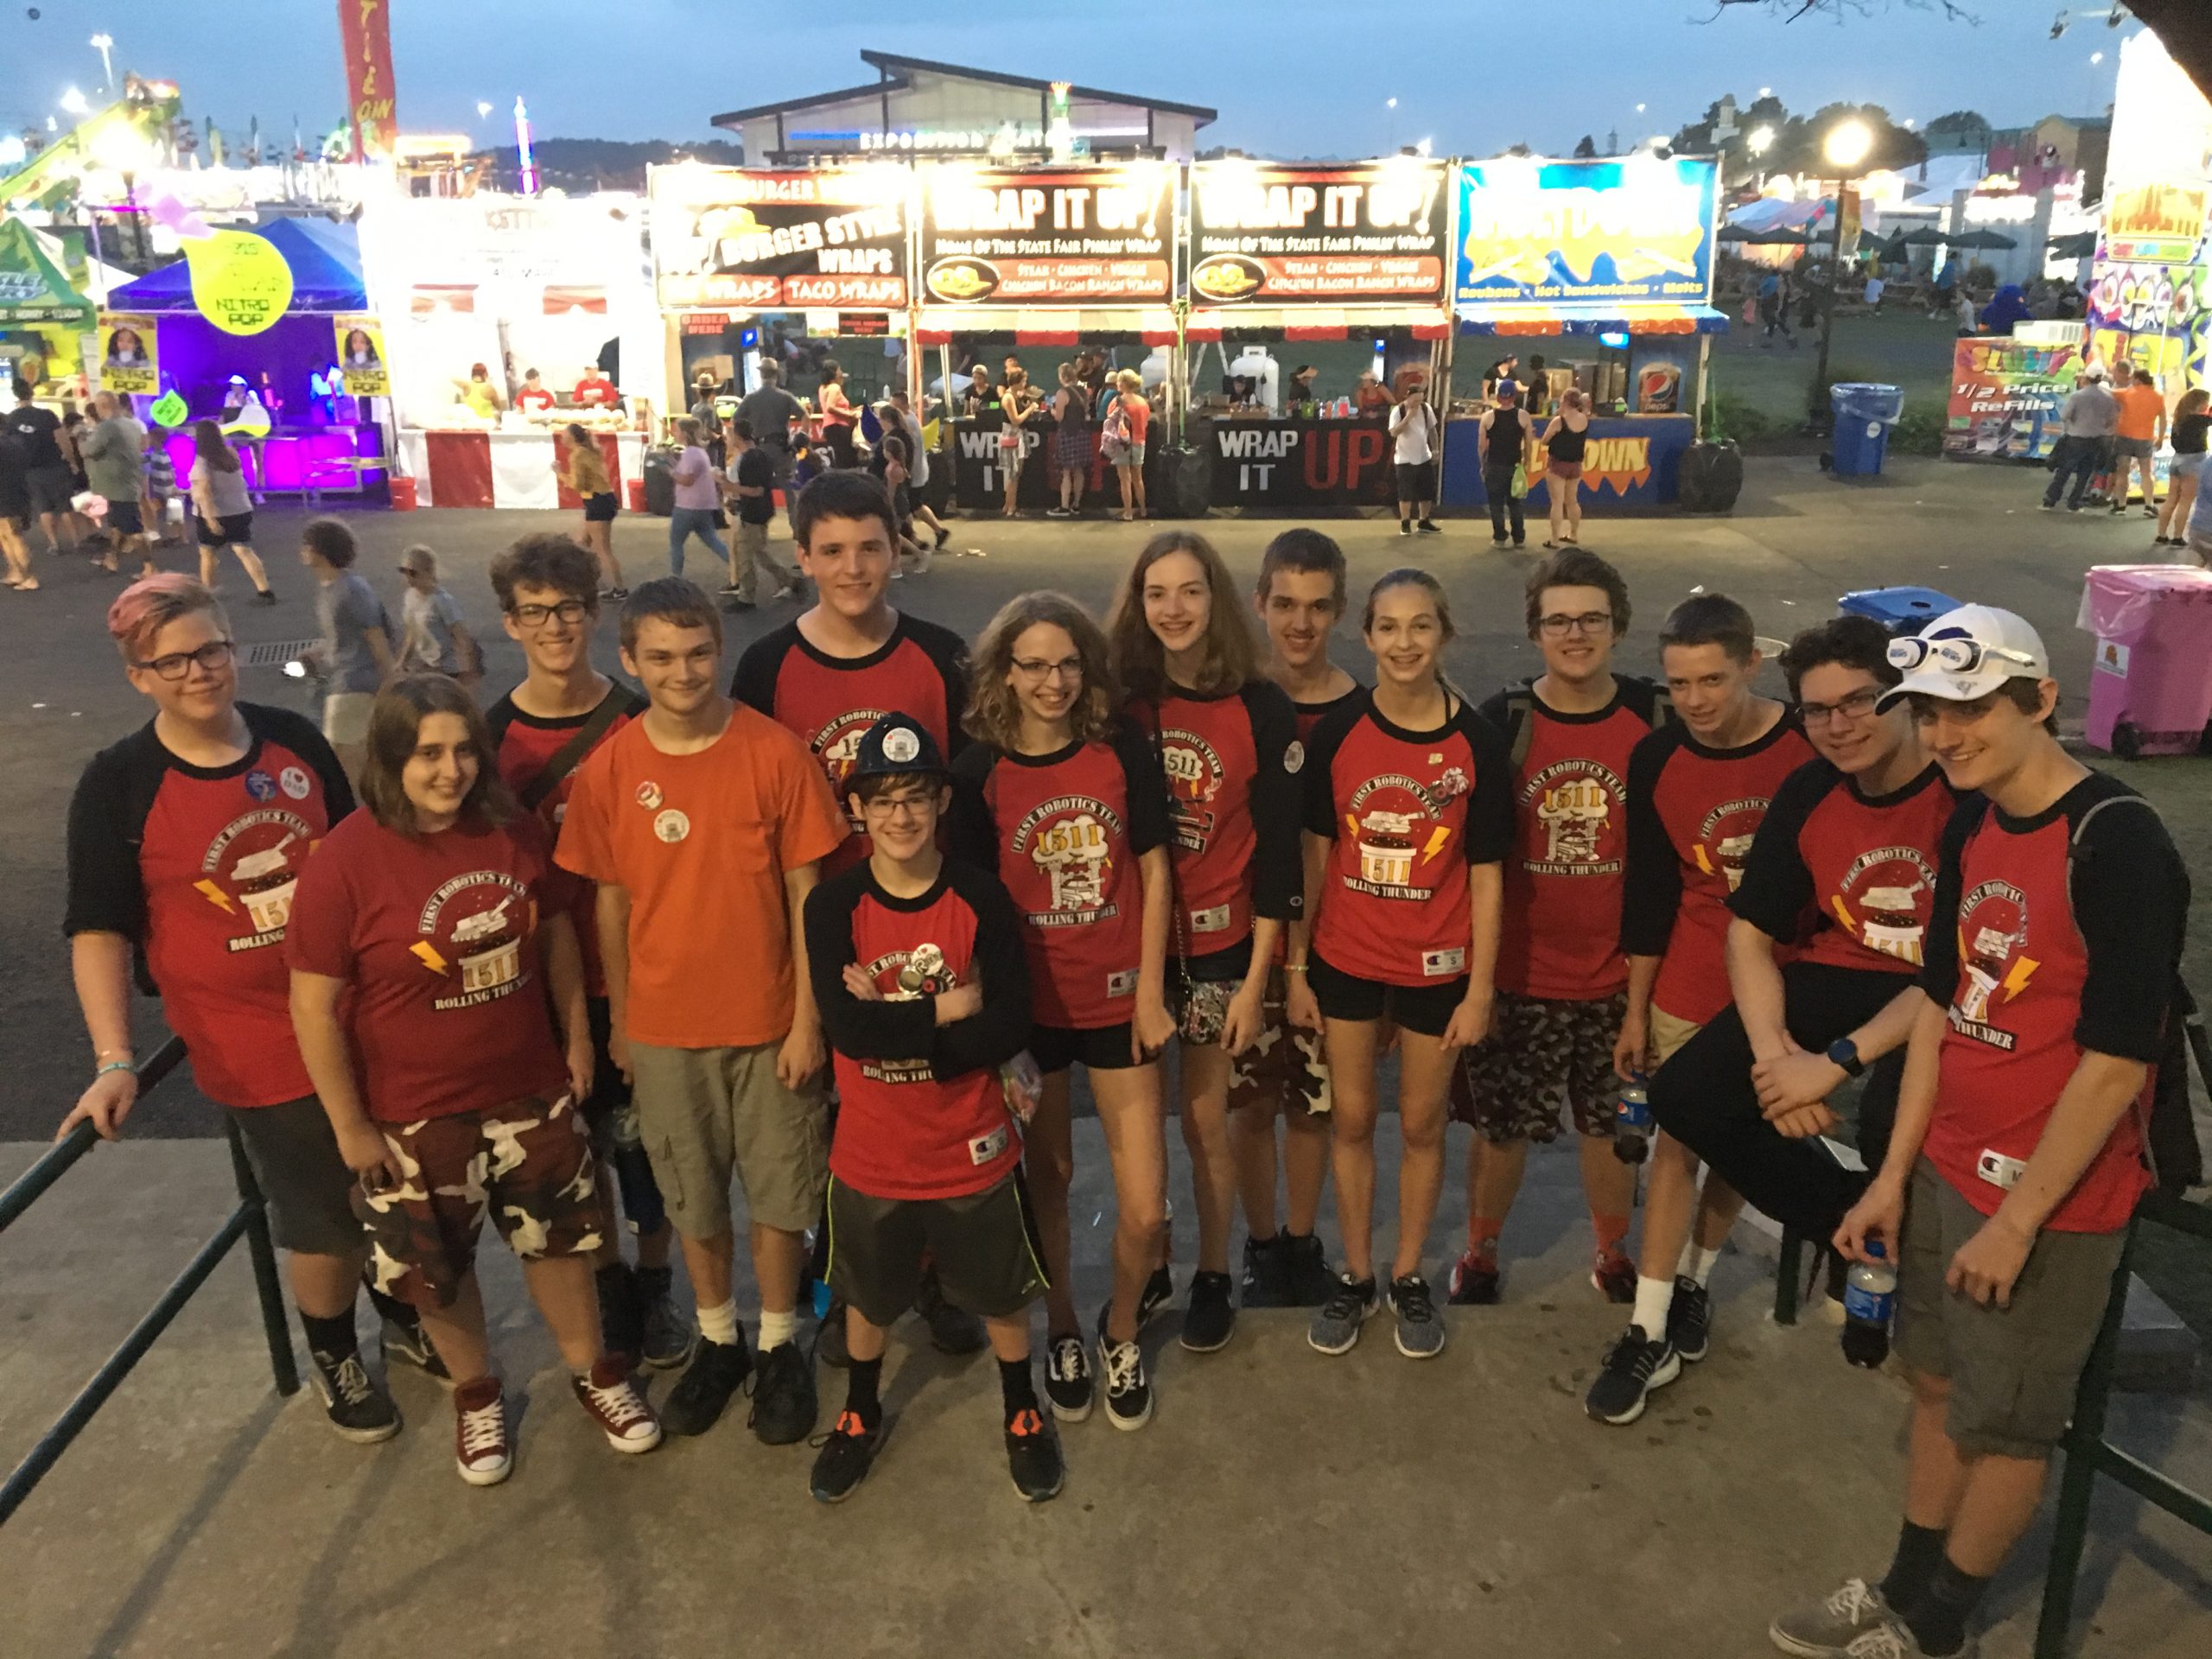 Members of FRC Team 1511 posing in front of booths at New York State Fair